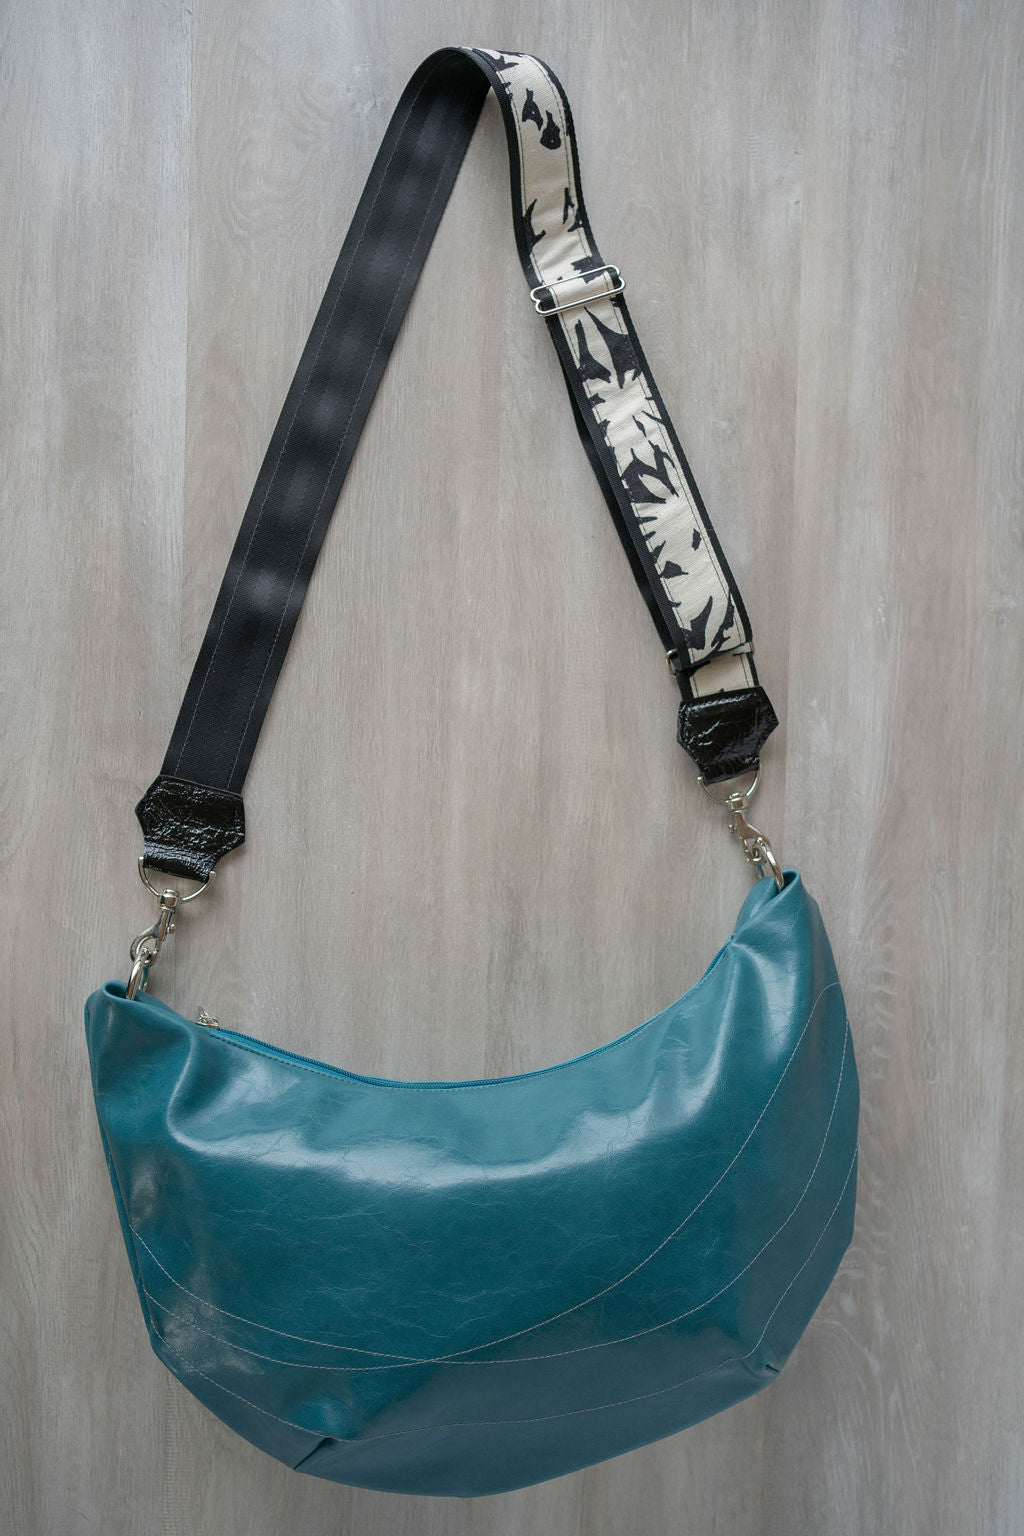 Womens Hobo Purse - Foxtrot Medium Topstitch Hobo Bag - Teal Vegan Leather made in usa#color_teal